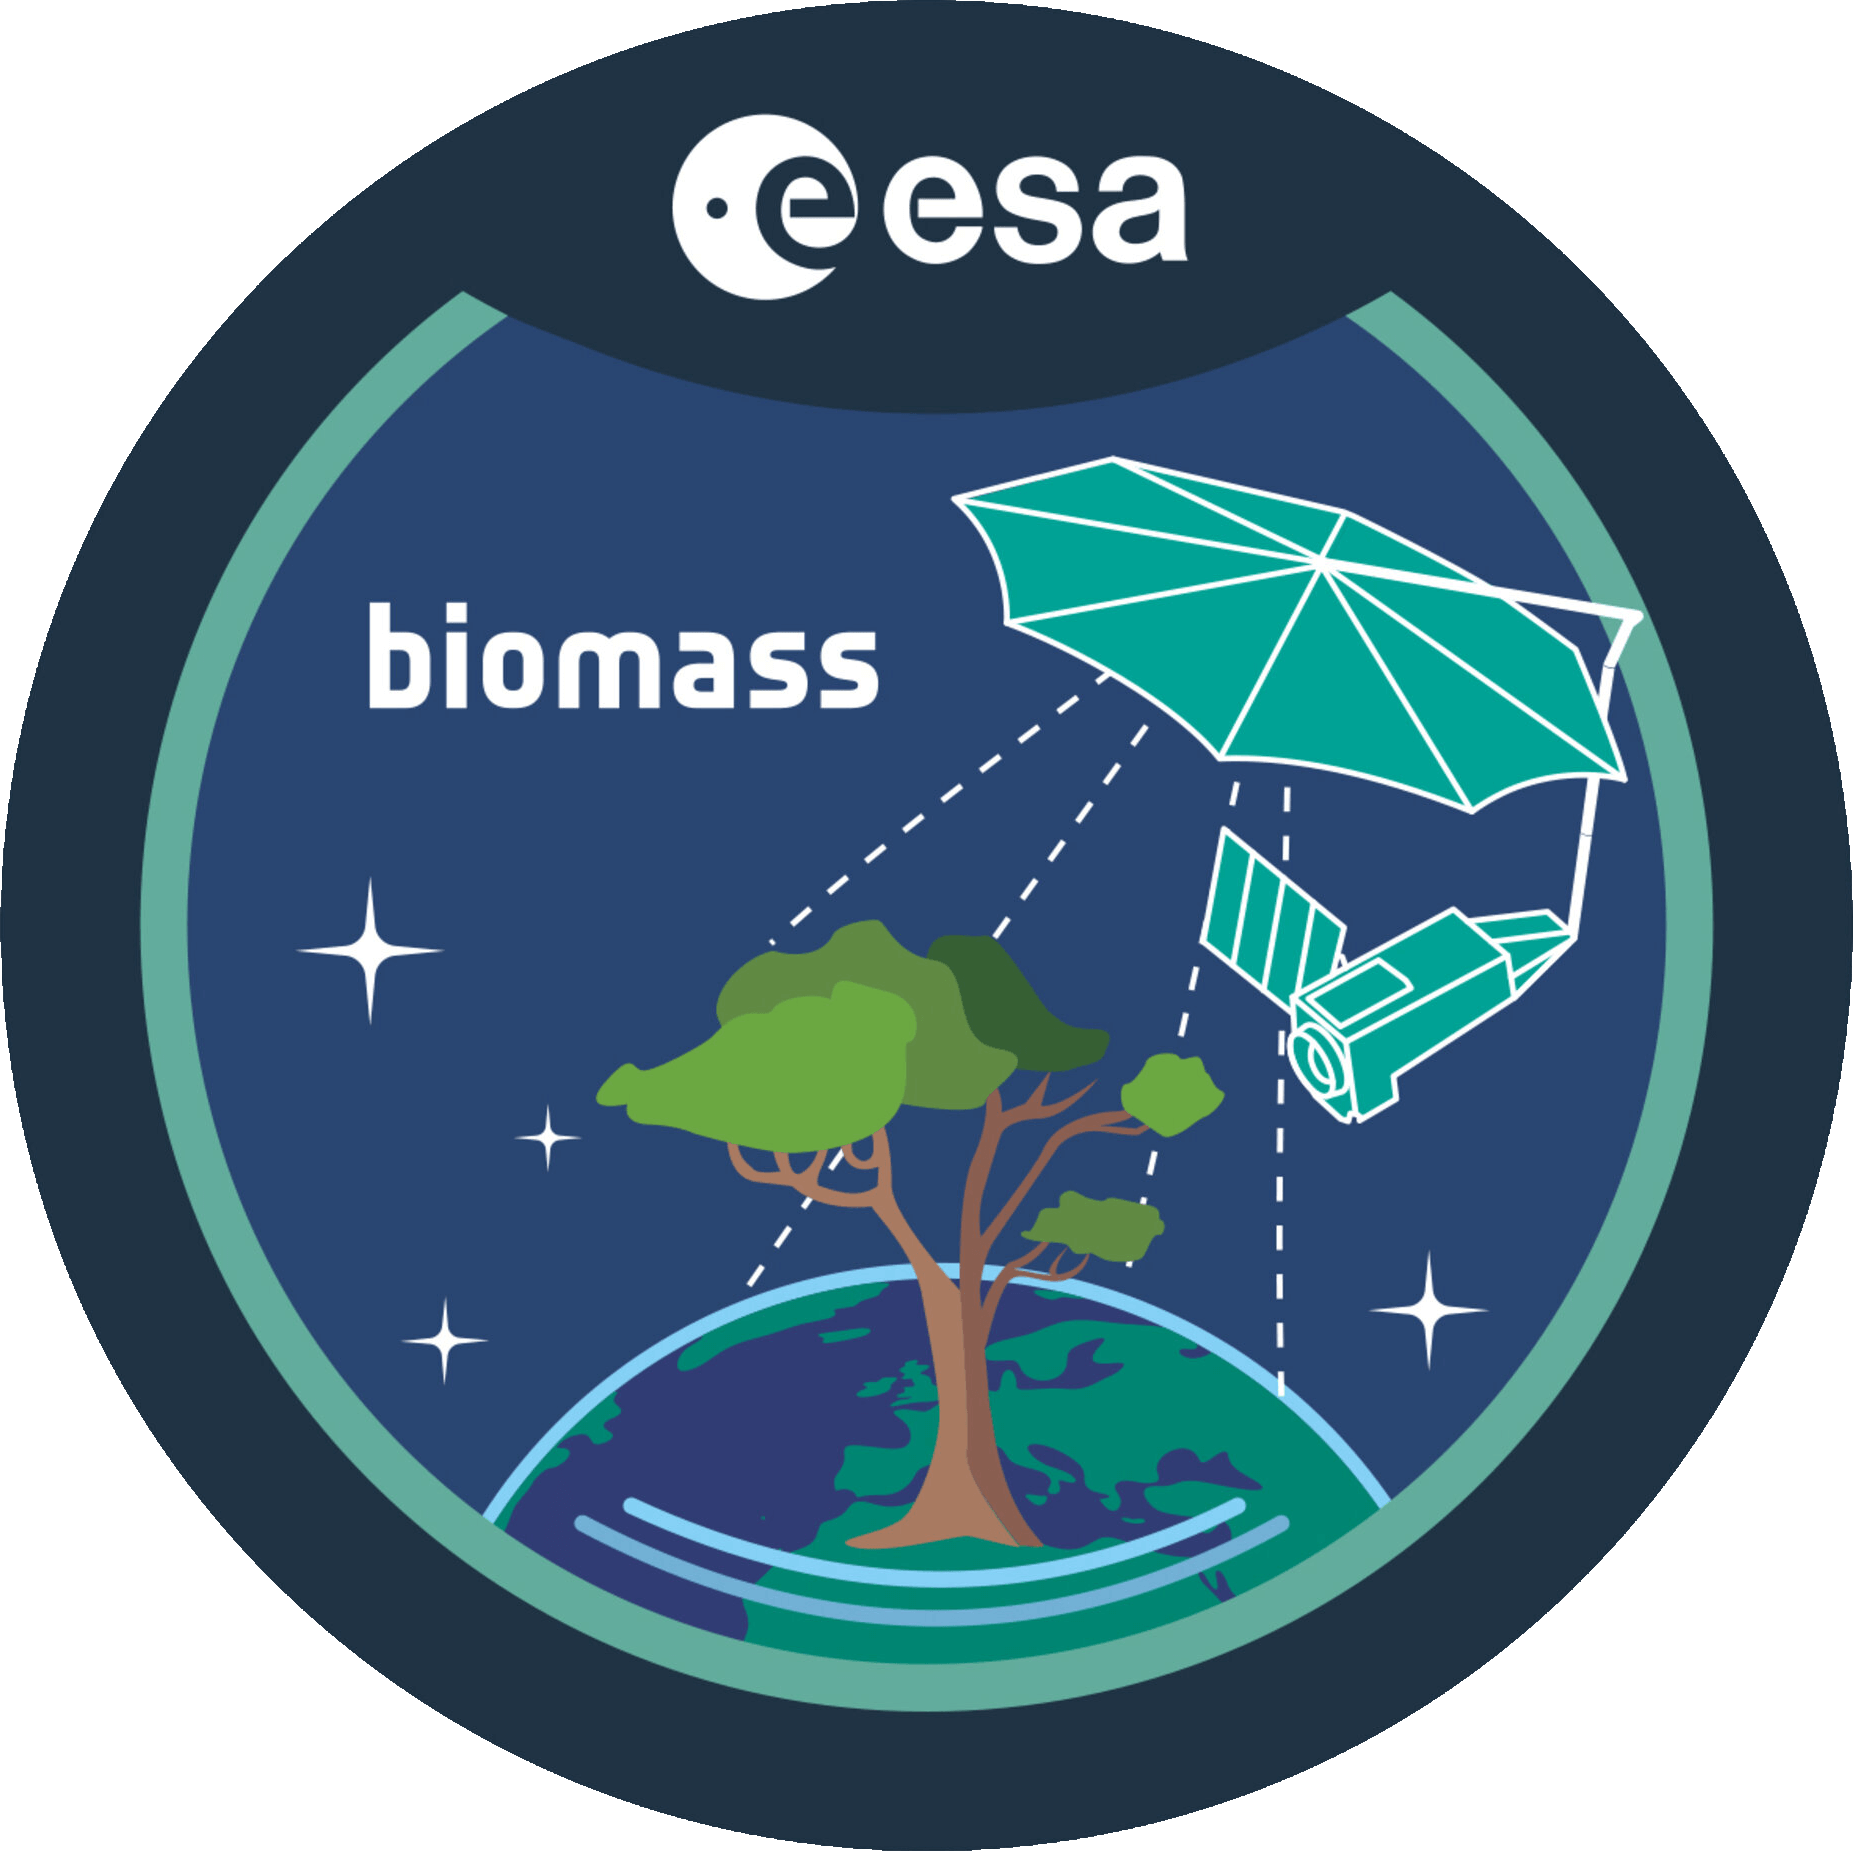 Mission patch for Biomass